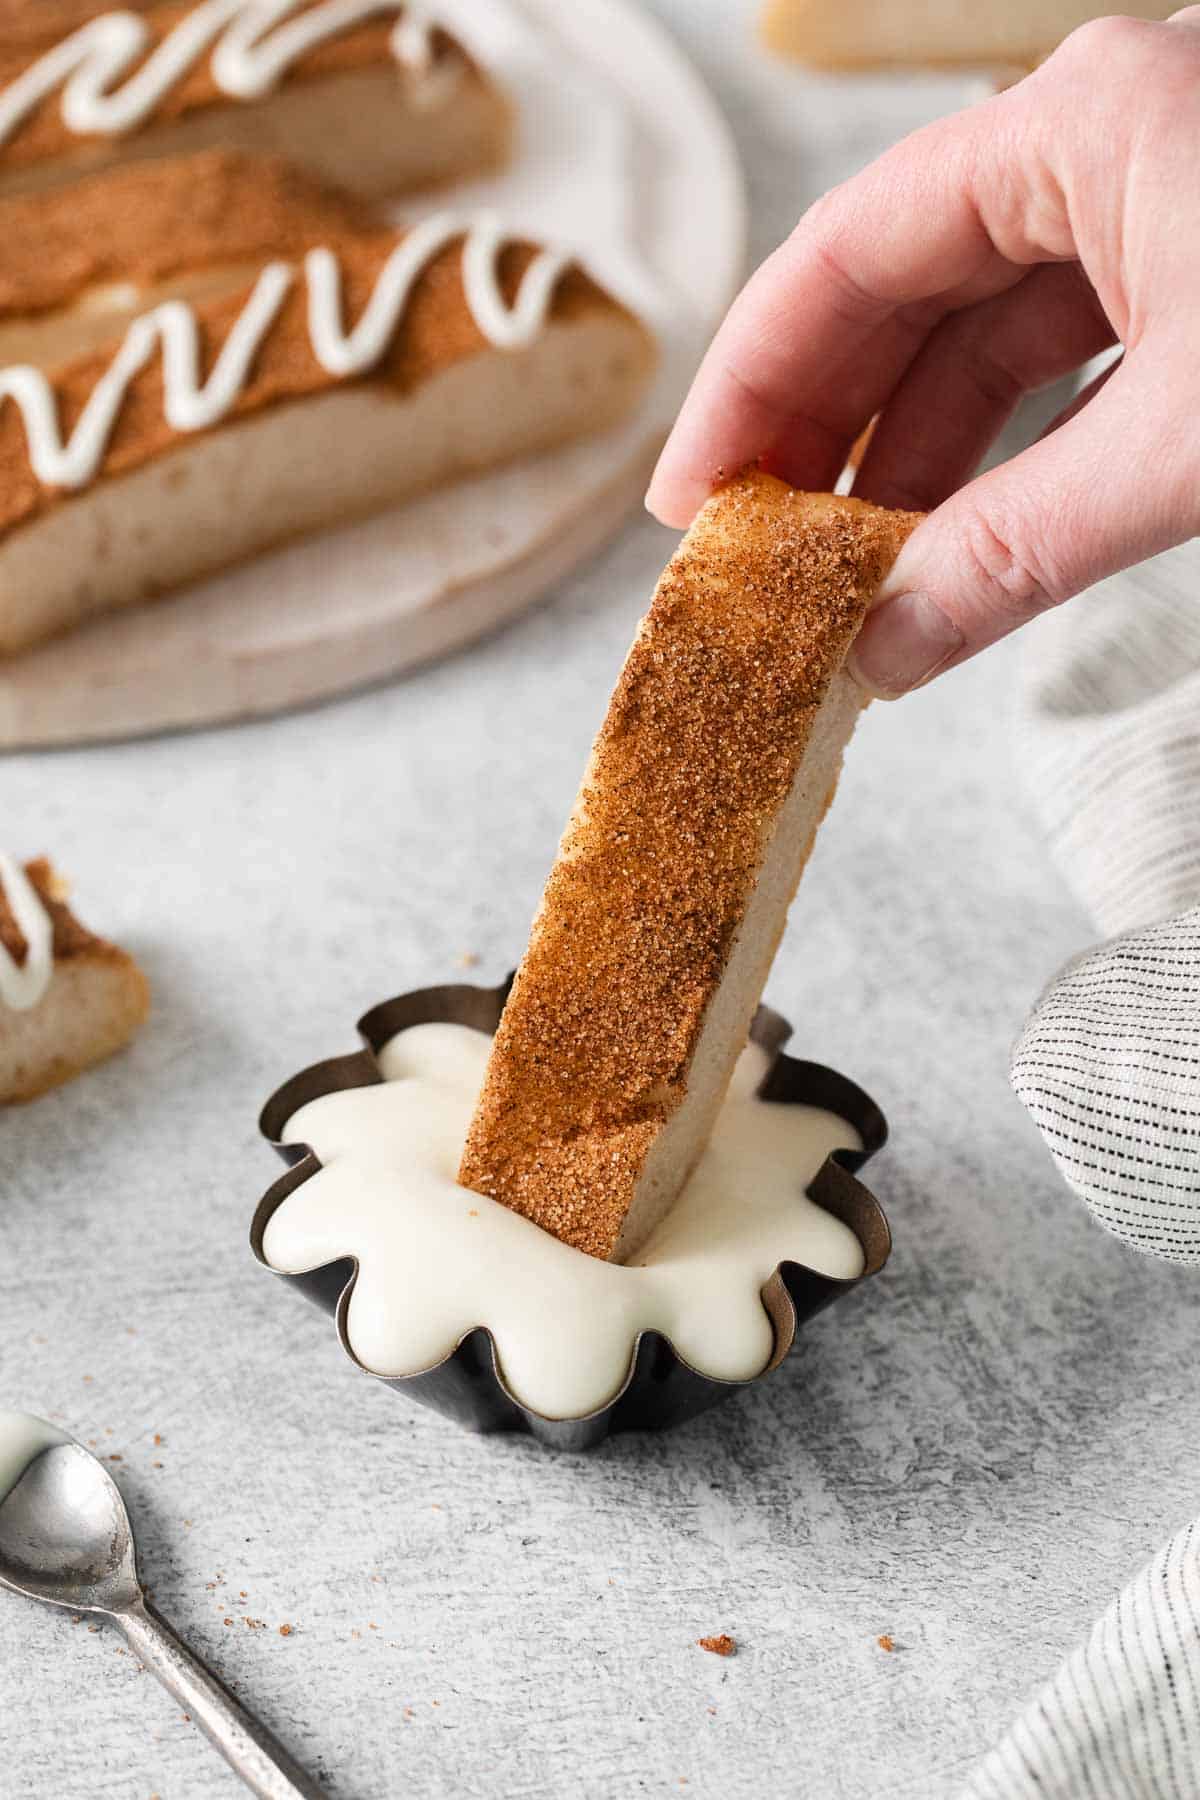 A hand dipping a cinnamon breadstick in glaze